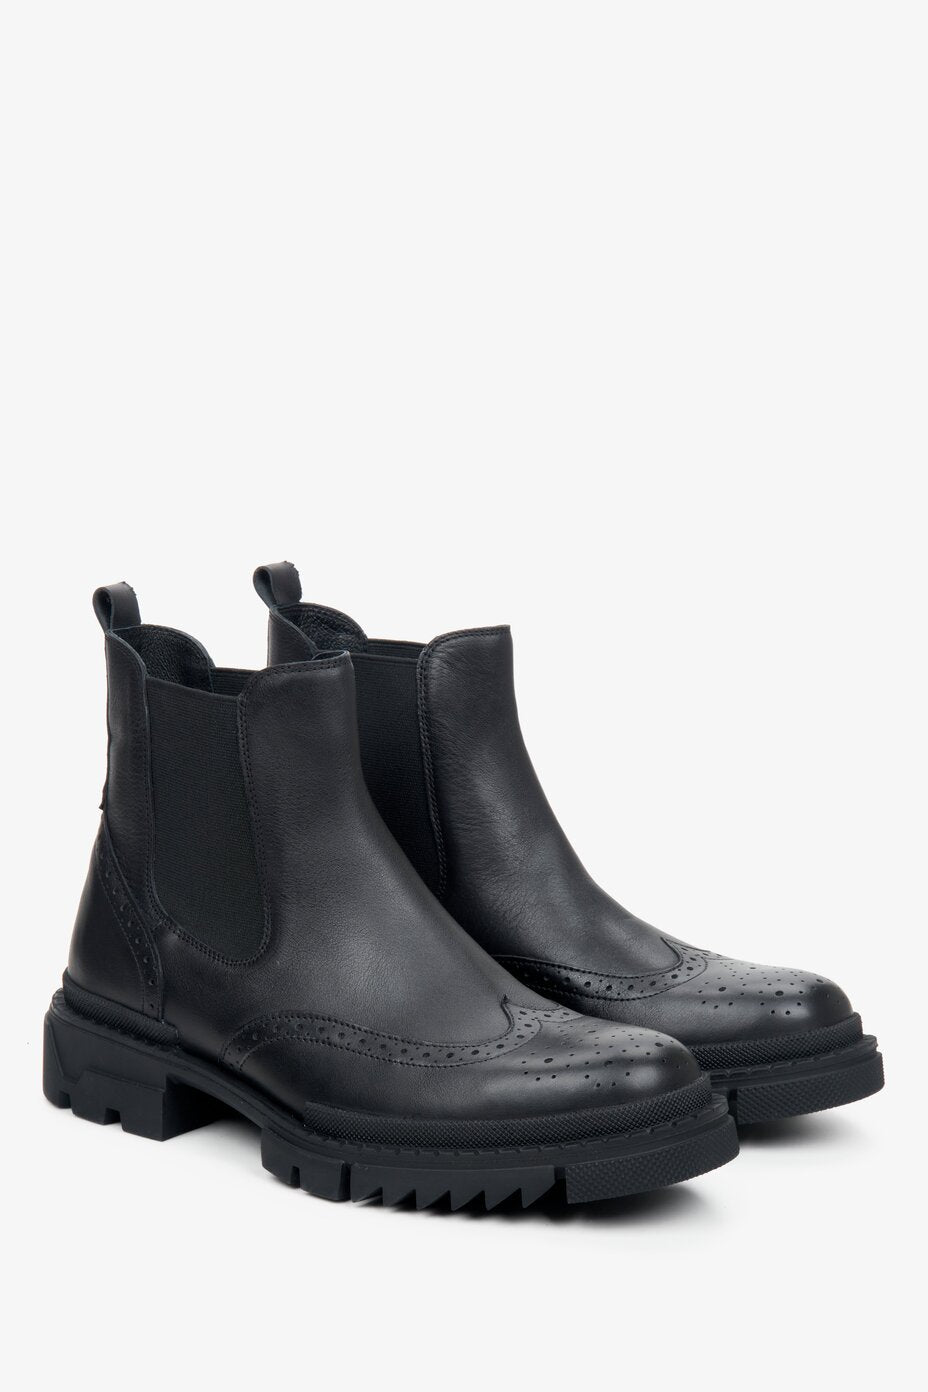 Men's black Chelsea boots by Estro made of genuine leather with perforation details.